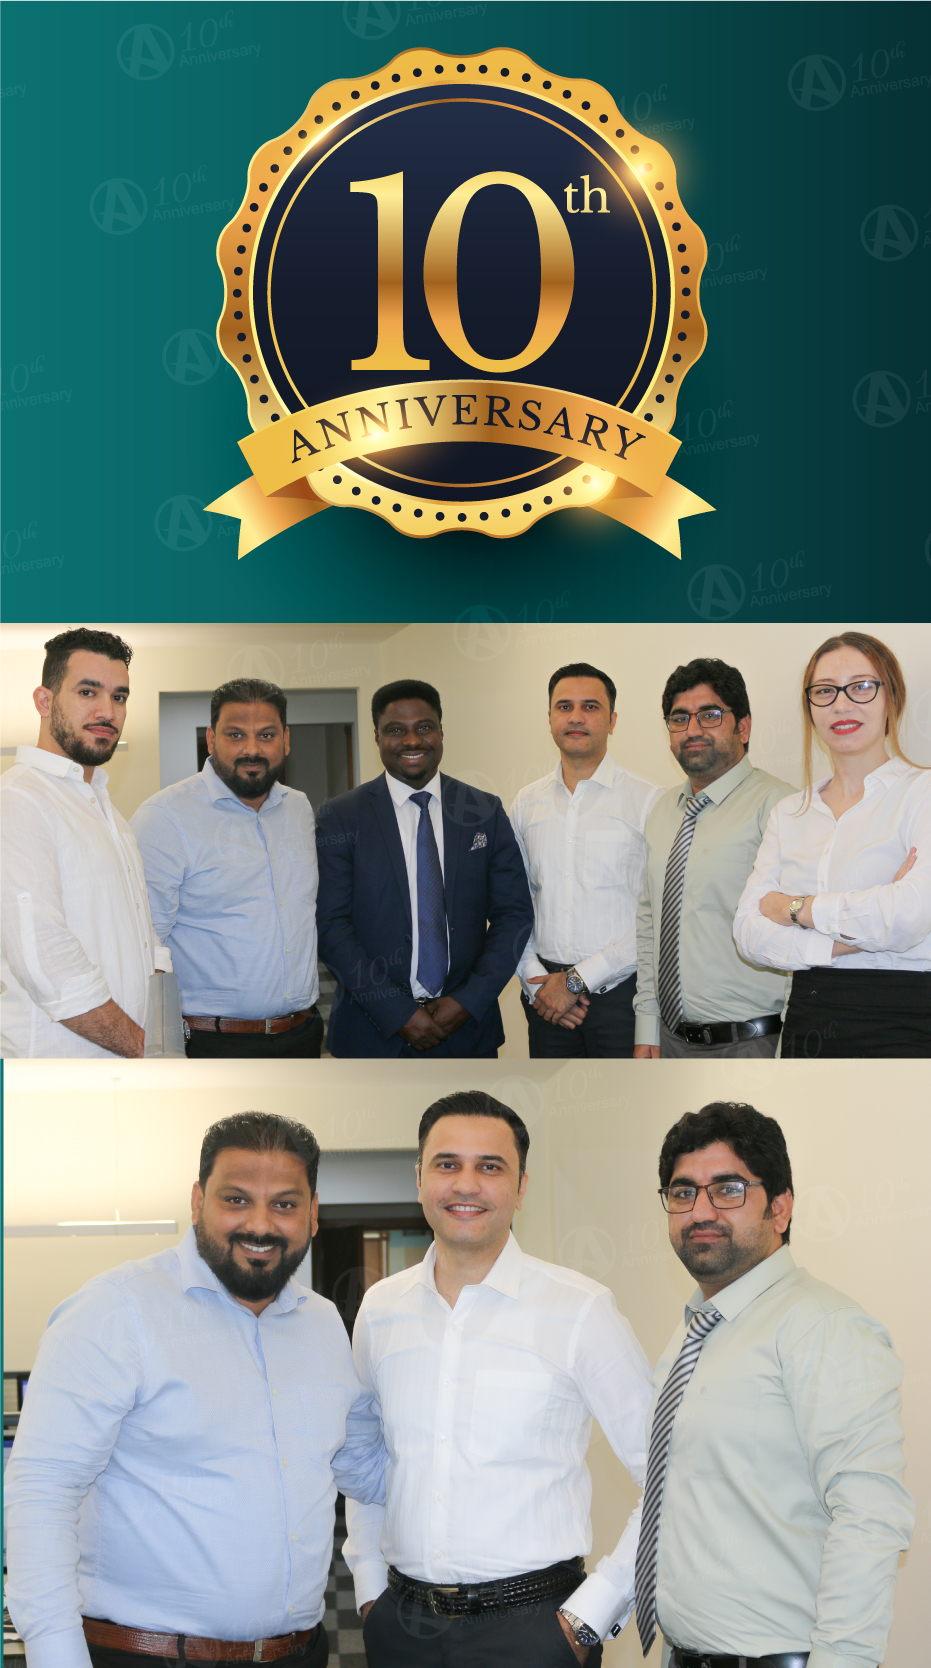 Armor Lubricants Manufacturer in UAE 10th Anniversary team Celebration Image